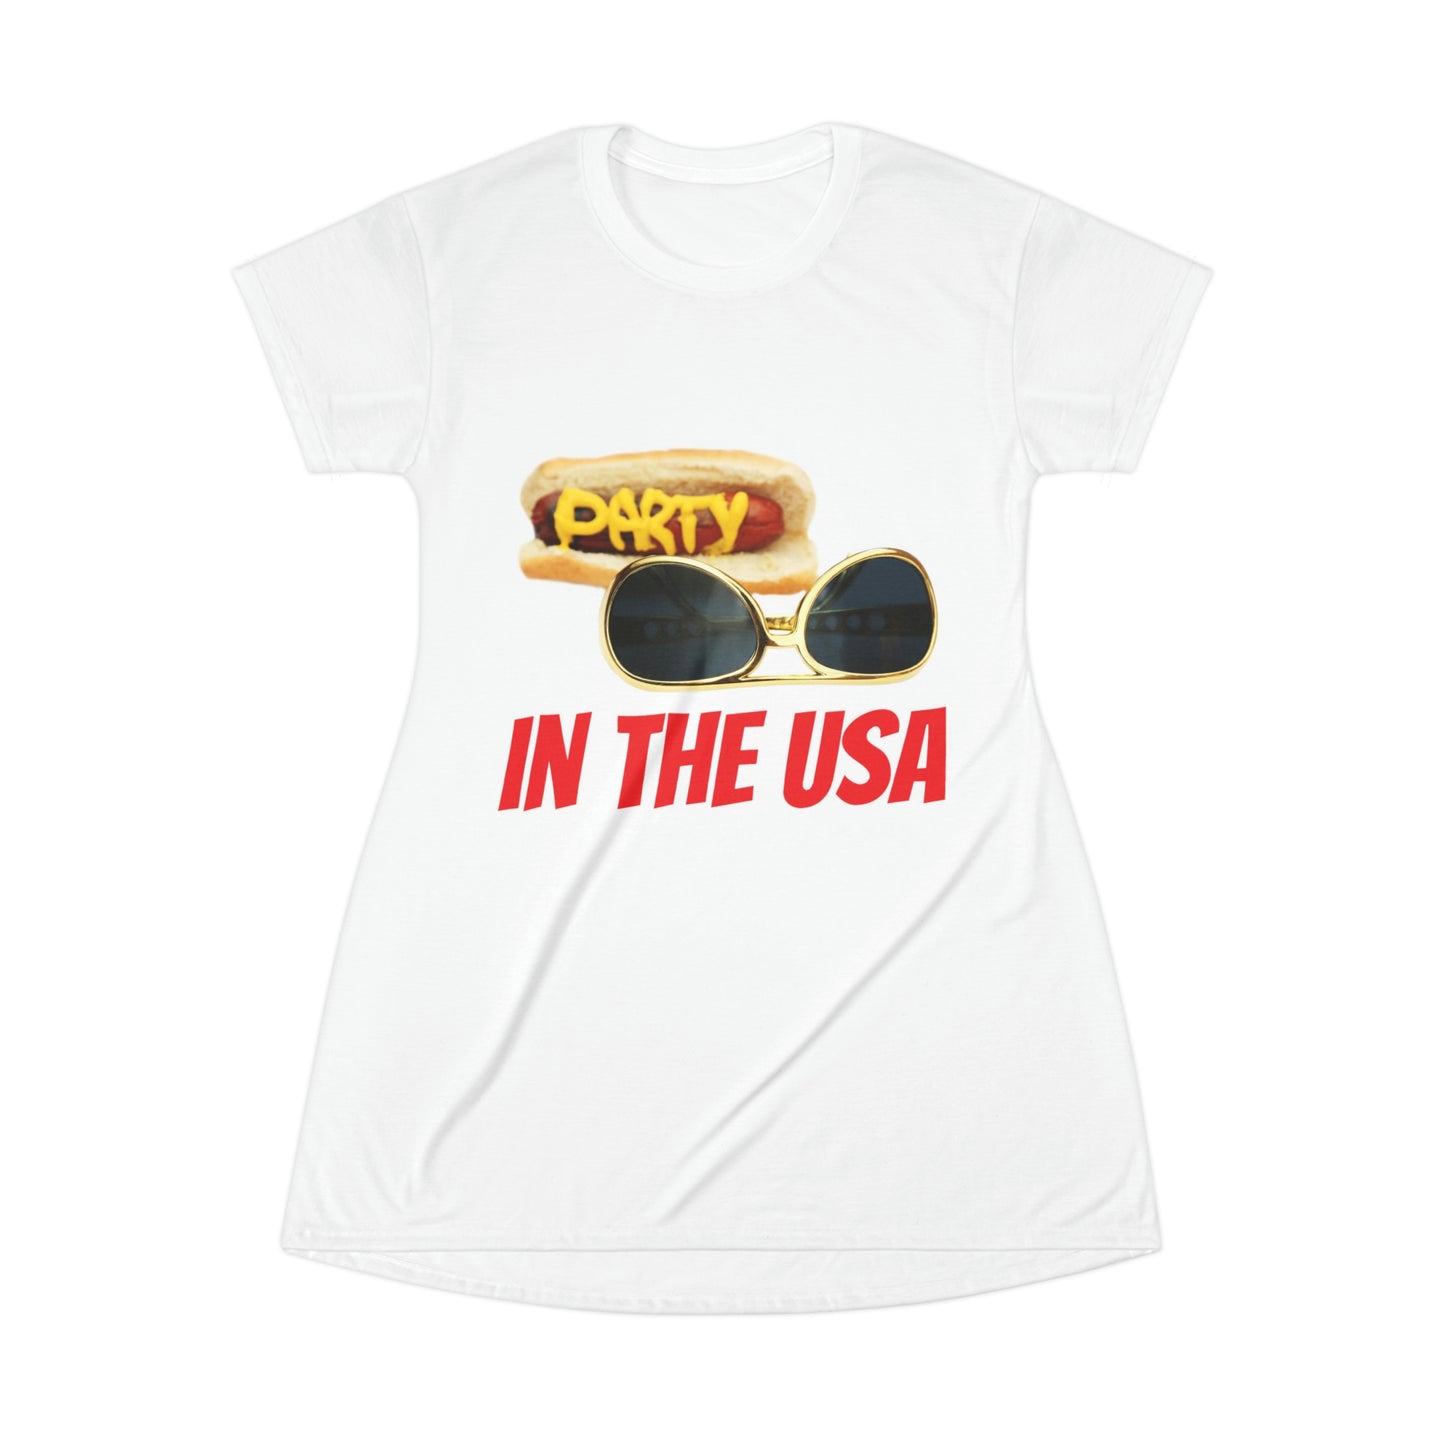 Party in the USA T-Shirt Dress